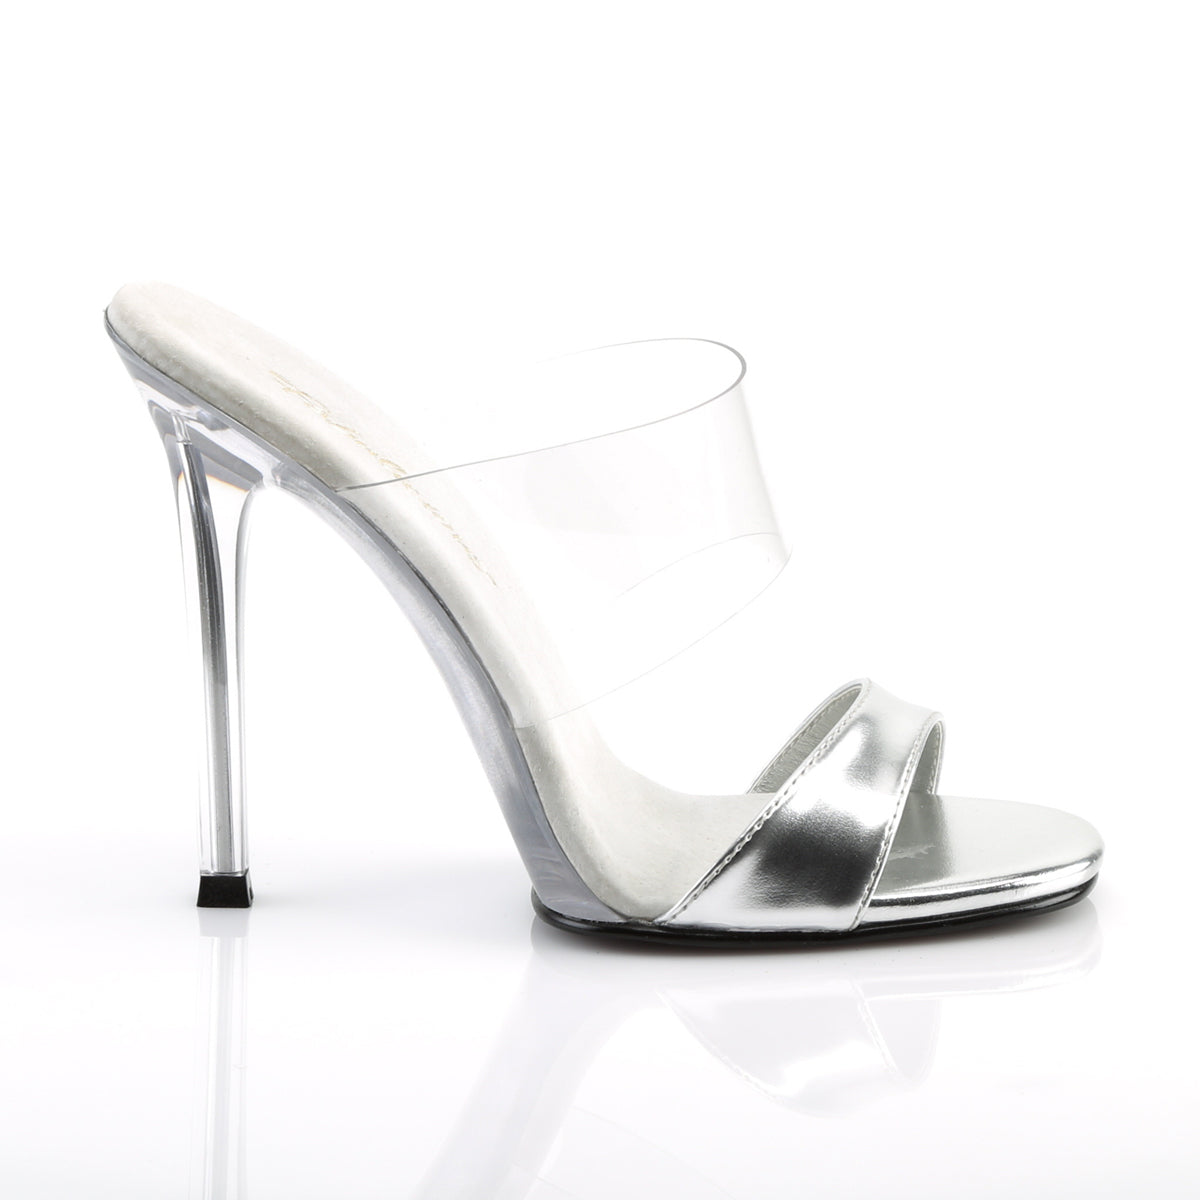 GALA-02L Fabulicious 4.5 Inch Heel Silver Sexy Shoes-Fabulicious- Sexy Shoes Fetish Heels